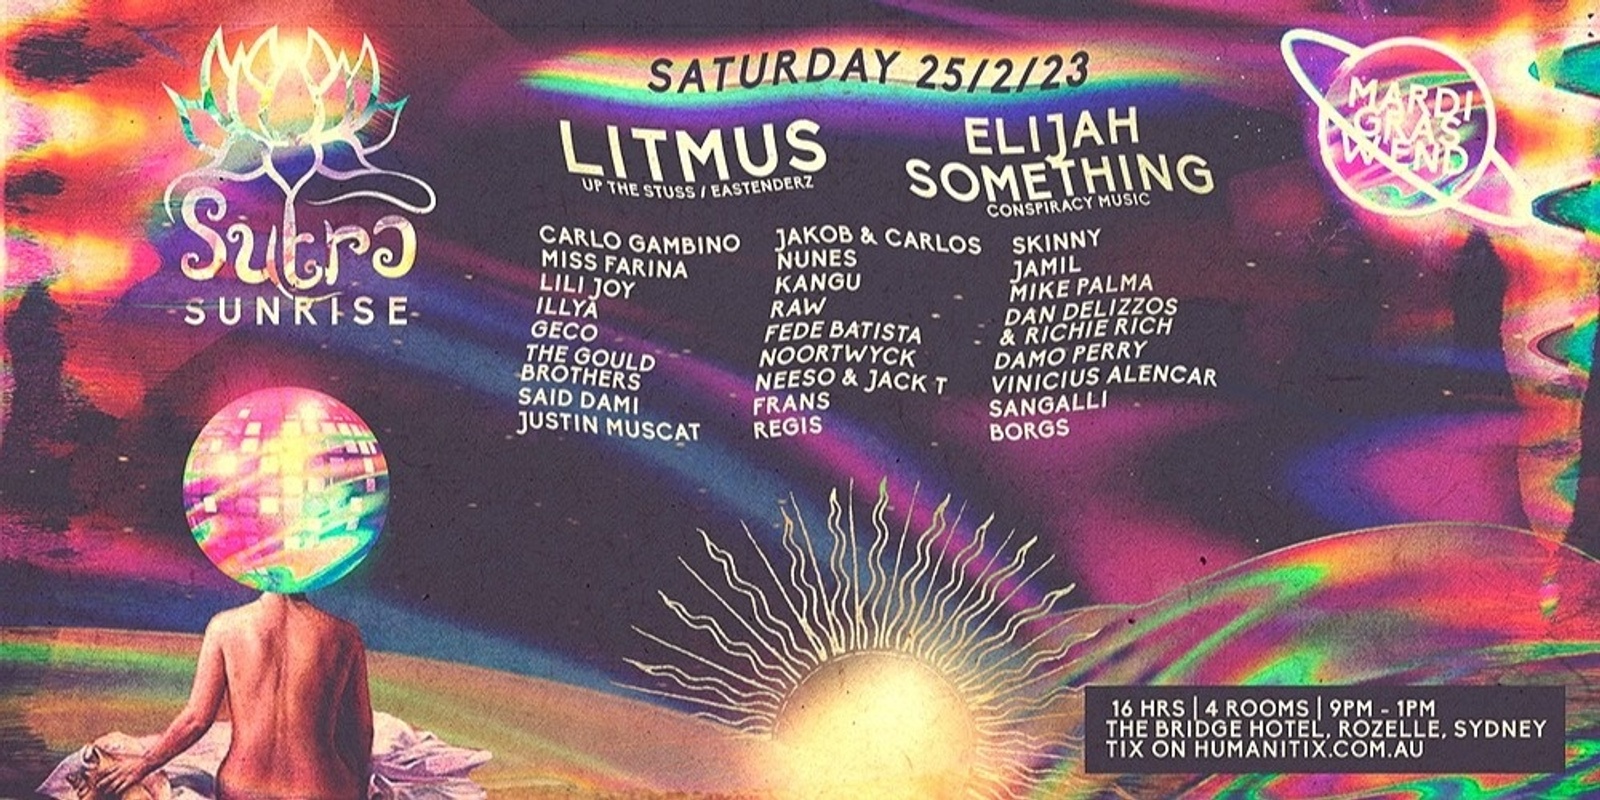 Banner image for SUTRA Sunrise // MARDI GRAS // Feat. Litmus (Up the Stuss /Eastenderz ) & Elijah Something (Conspiracy) // 16hrs party // 4 stages